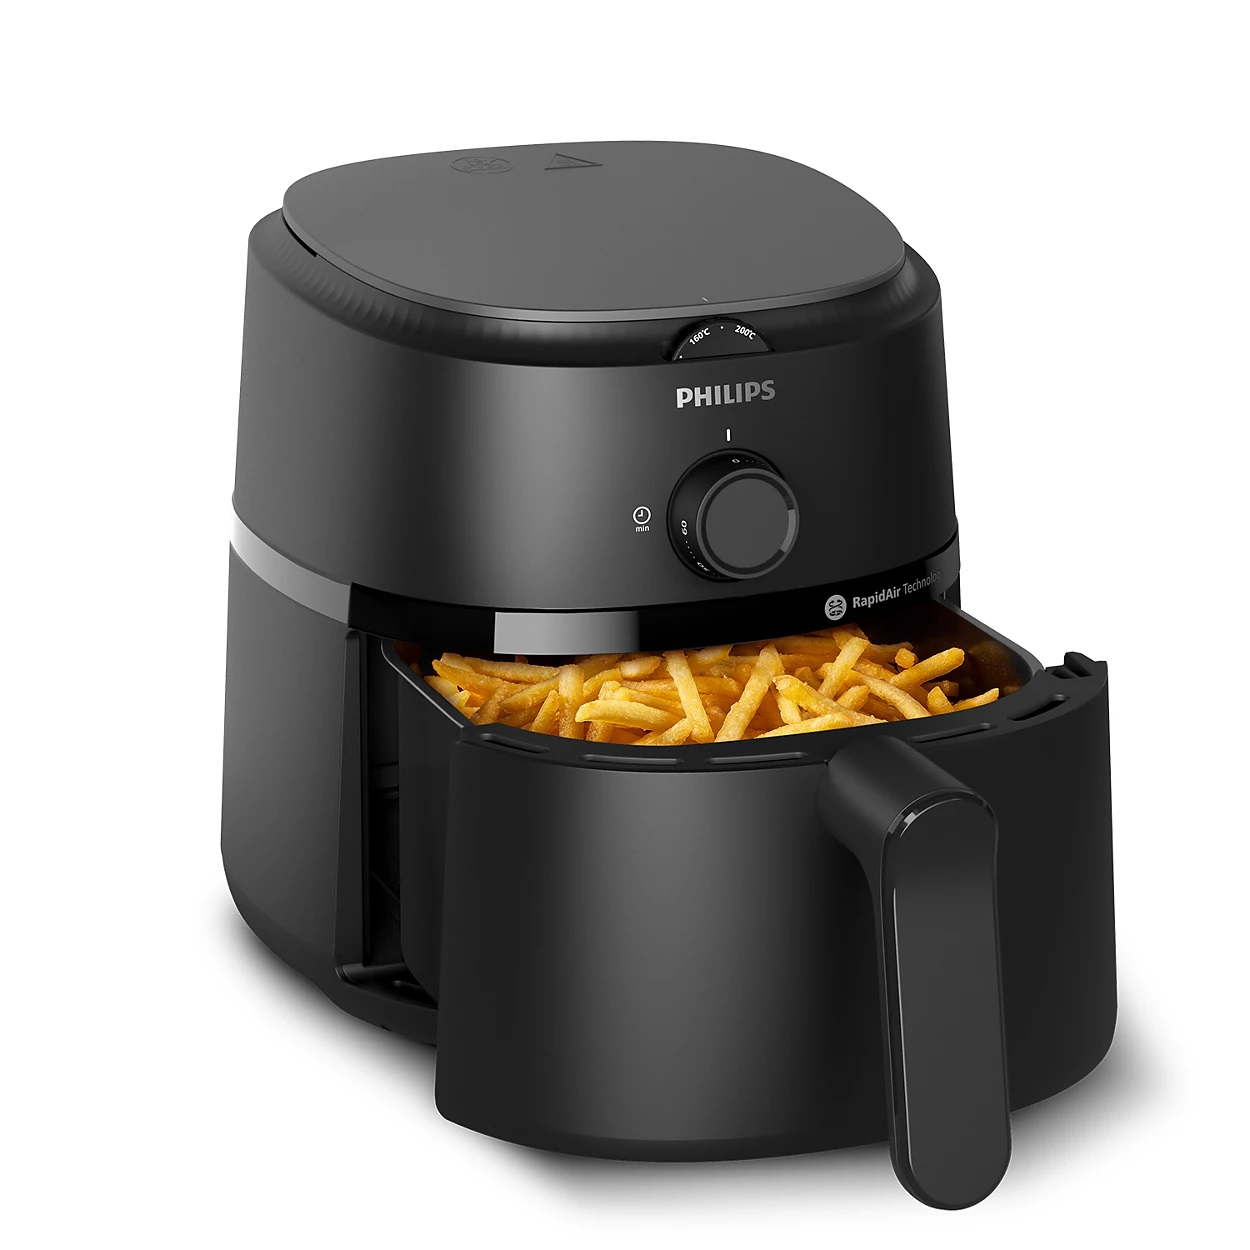 PHILIPS Airfryer 3.2L 1000 Series NA110/09